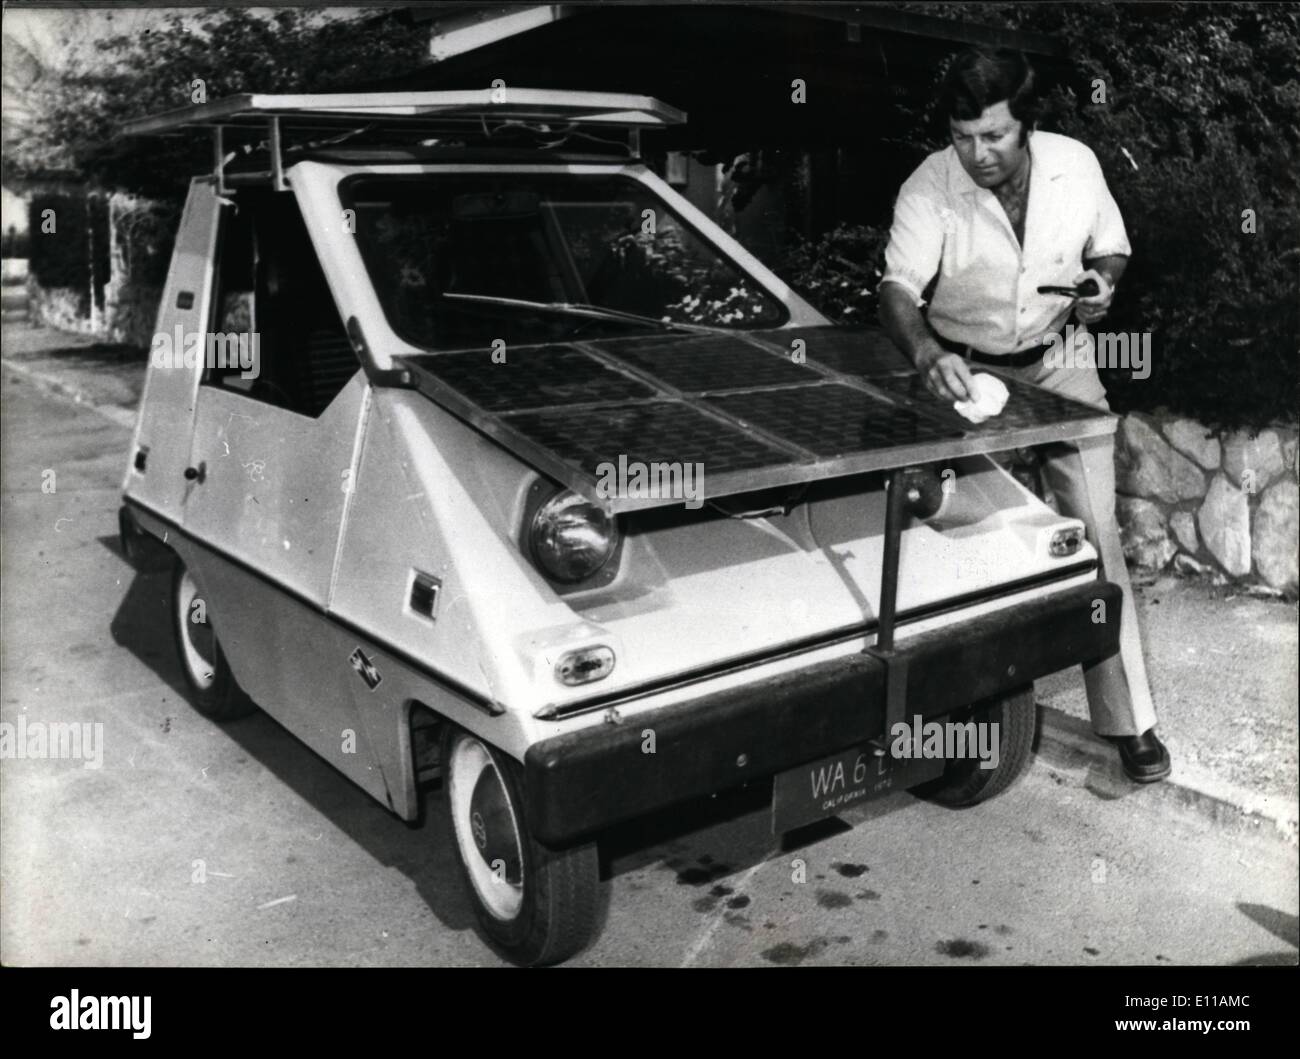 Oct. 10, 1976 - The ''Ugly Duckling'' makes its debut-The world's first civilian car partially powered by solar energy: A two-seater car known as the ''Ugly Duckling'' made automotive history by becoming the world's first civilian car partially powered by solar energy. Professor Arye Braunstein, head of the Power Engineering Department of Tel-Aviv University, demonstrated the ''Ugly Duckling'', which has converted from a regular electric battery-powered vehicle into a ''mixed-fuel'' vehicle Stock Photo